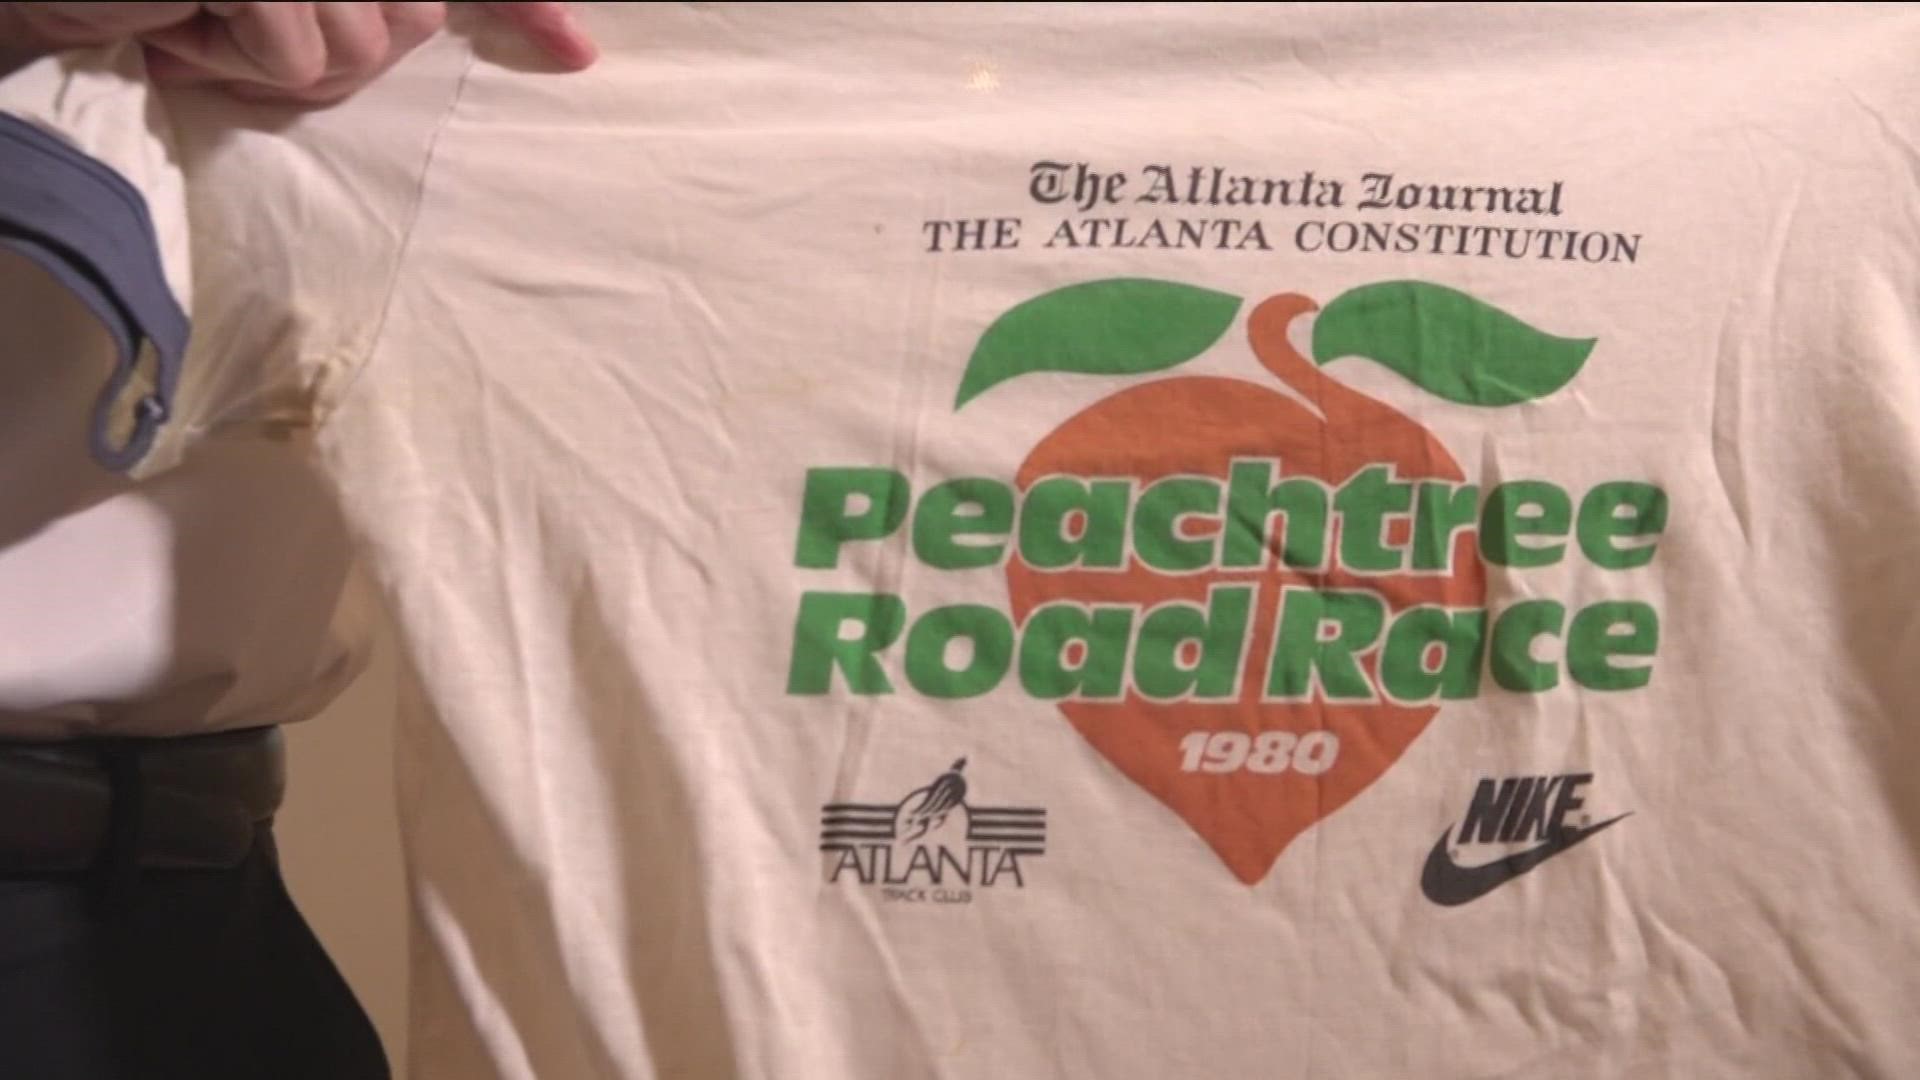 As tradition, the winner of the T-shirt design conest will not be revealed until the morning of the AJC Peachtree Road Race on Tuesday, July 4, 2023.